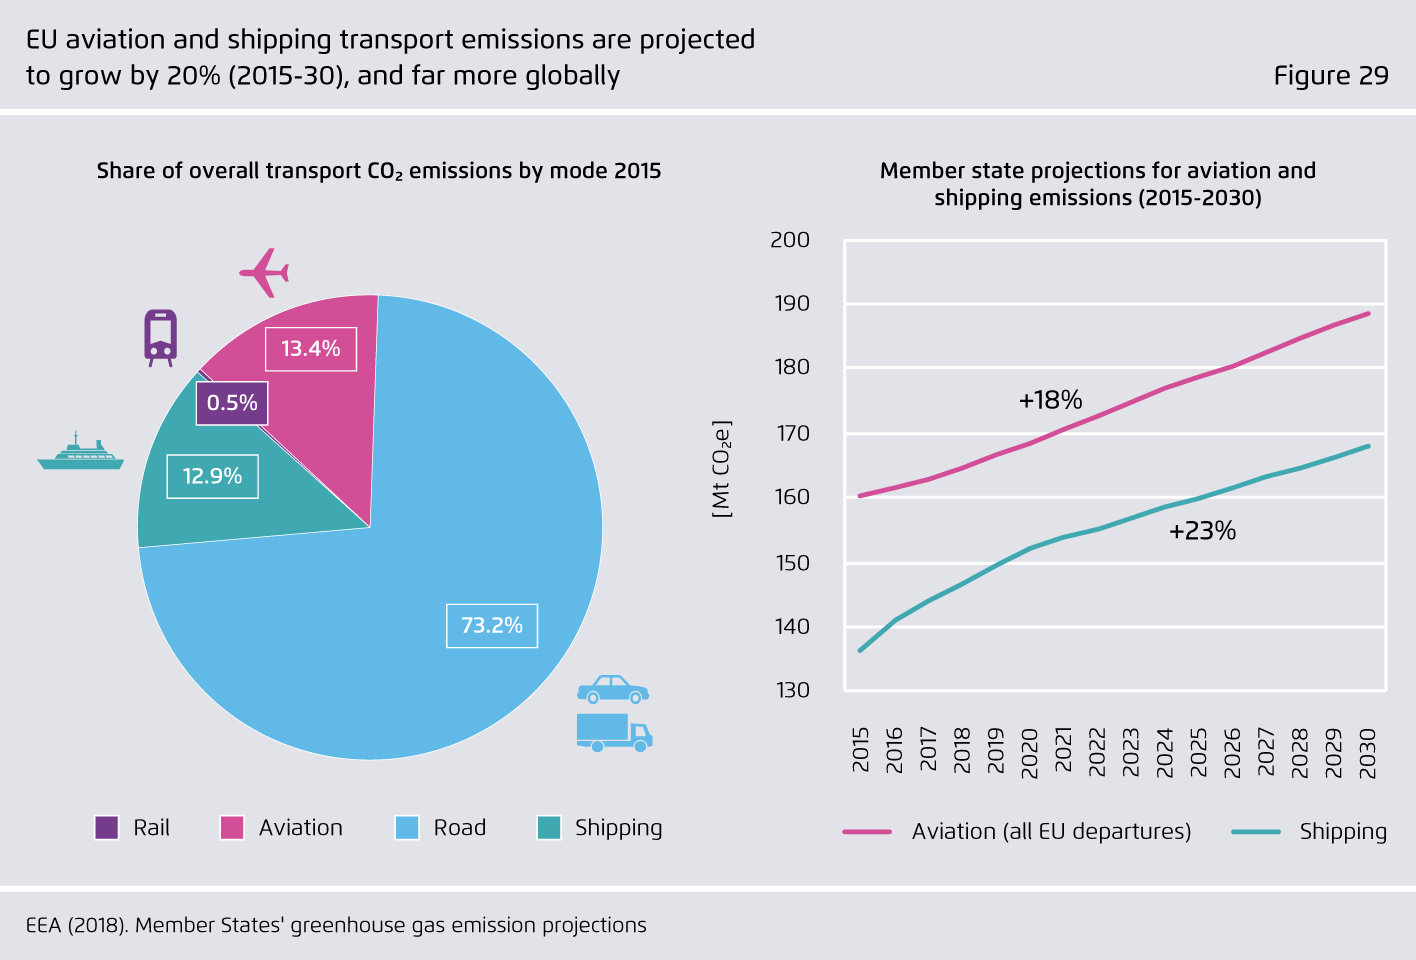 Preview for EU aviation and shipping transport emissions are projected to grow by 20% (2015-30), and far more globally